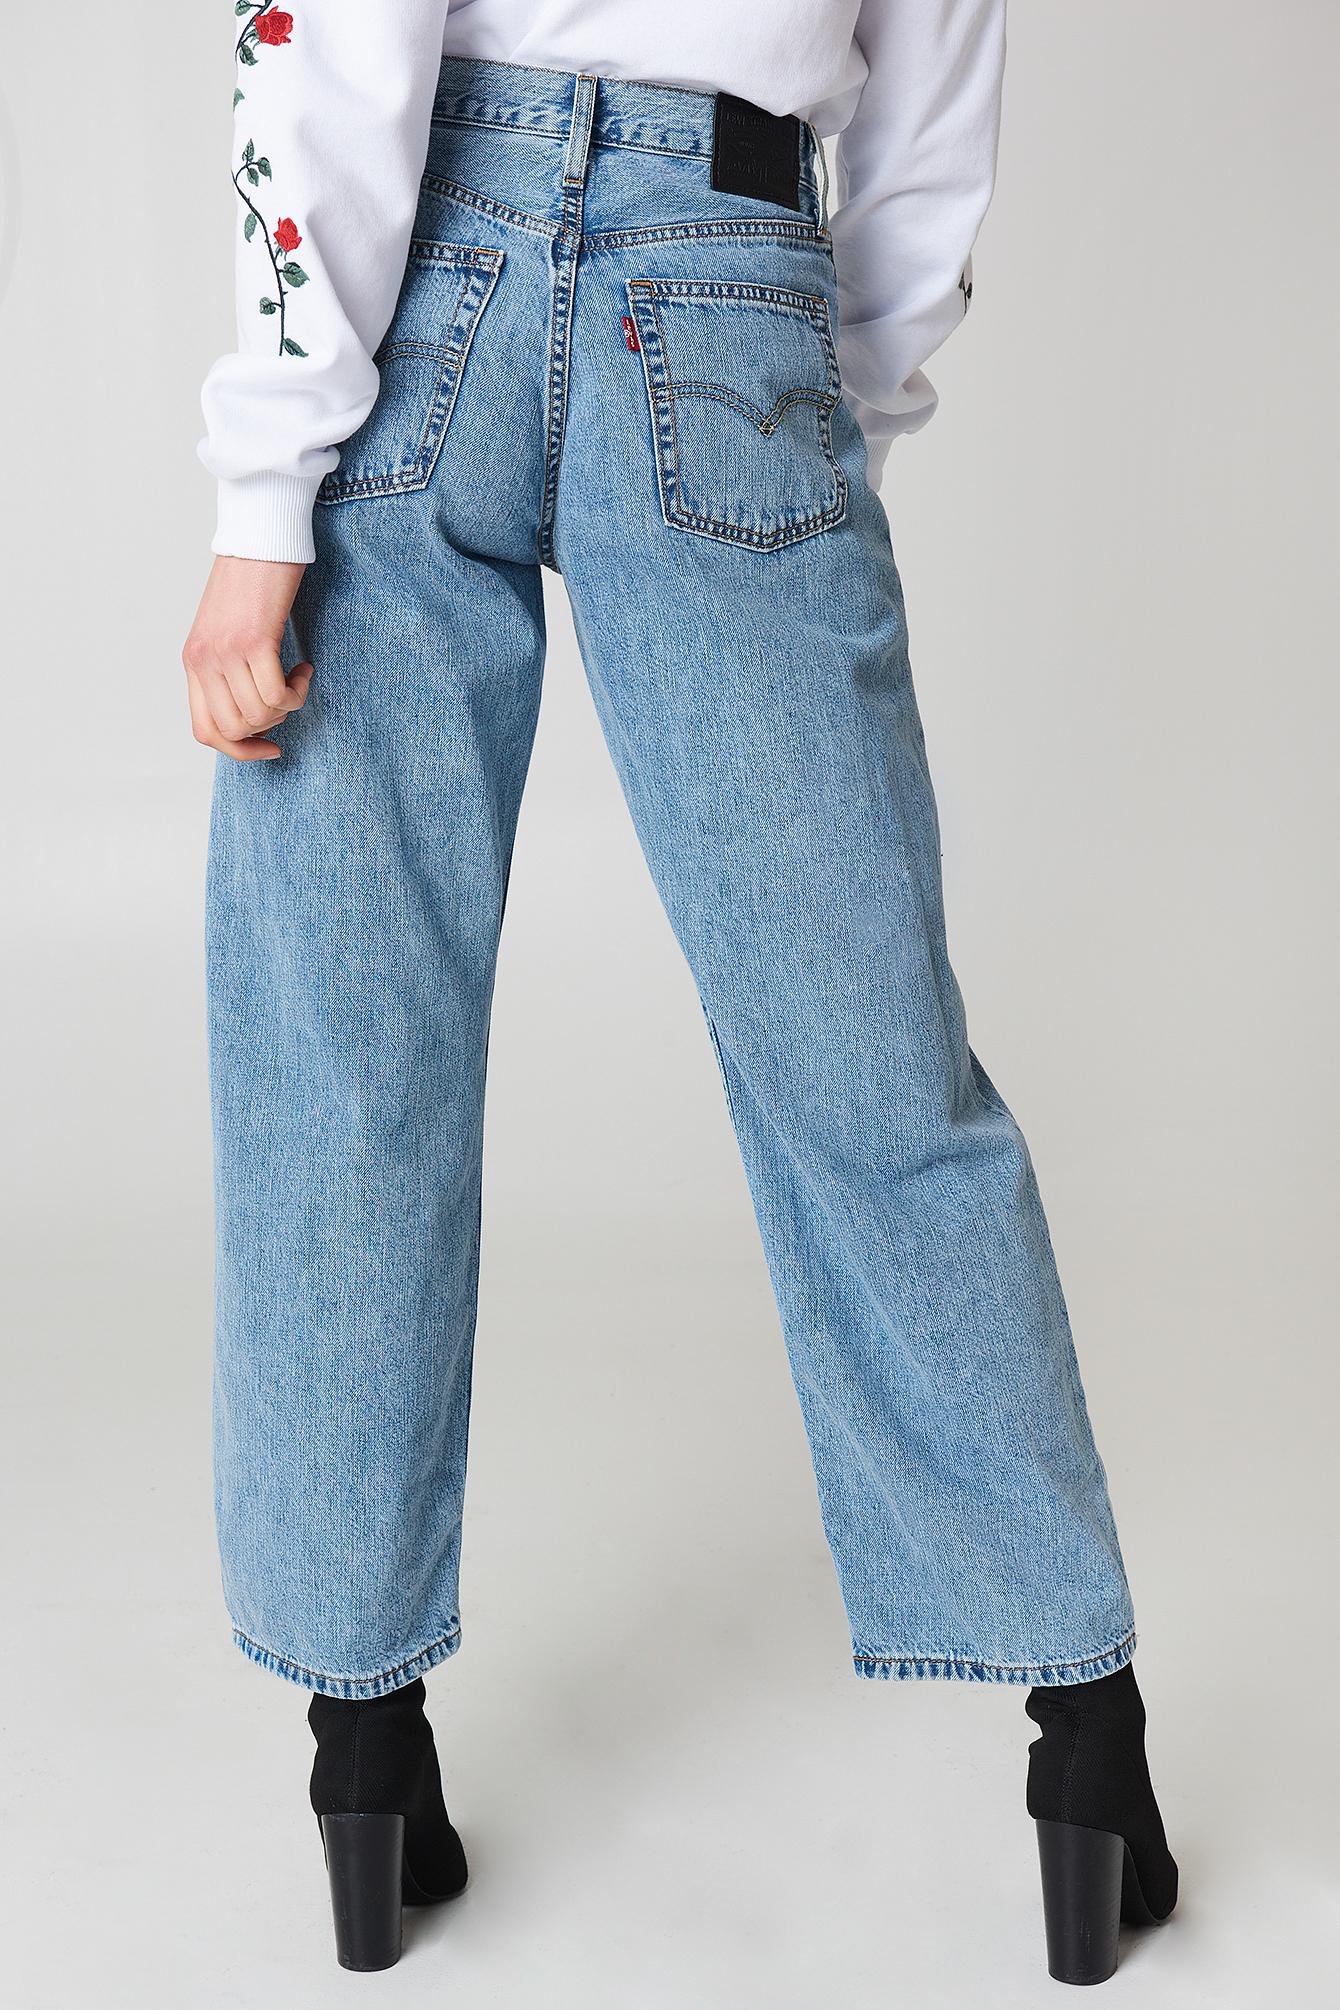 Lyst - Levi'S Big Baggy Jeans in Blue